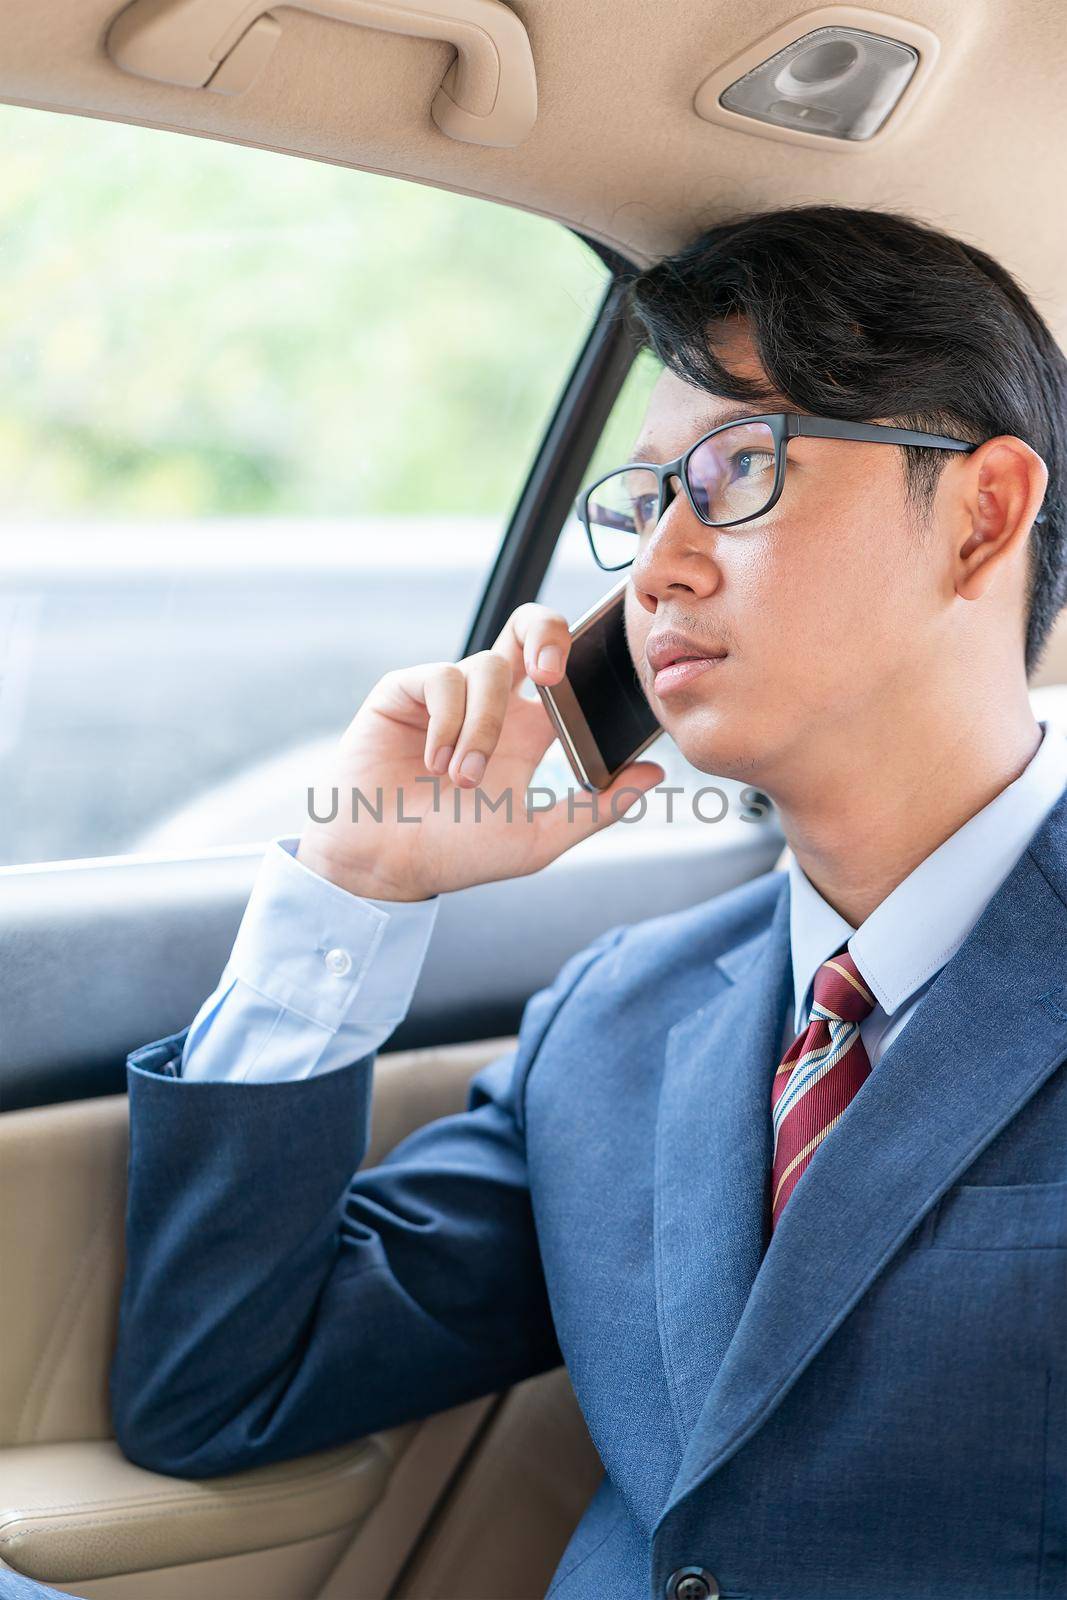 Young asian business men portrait in suit  talking on the phone in car